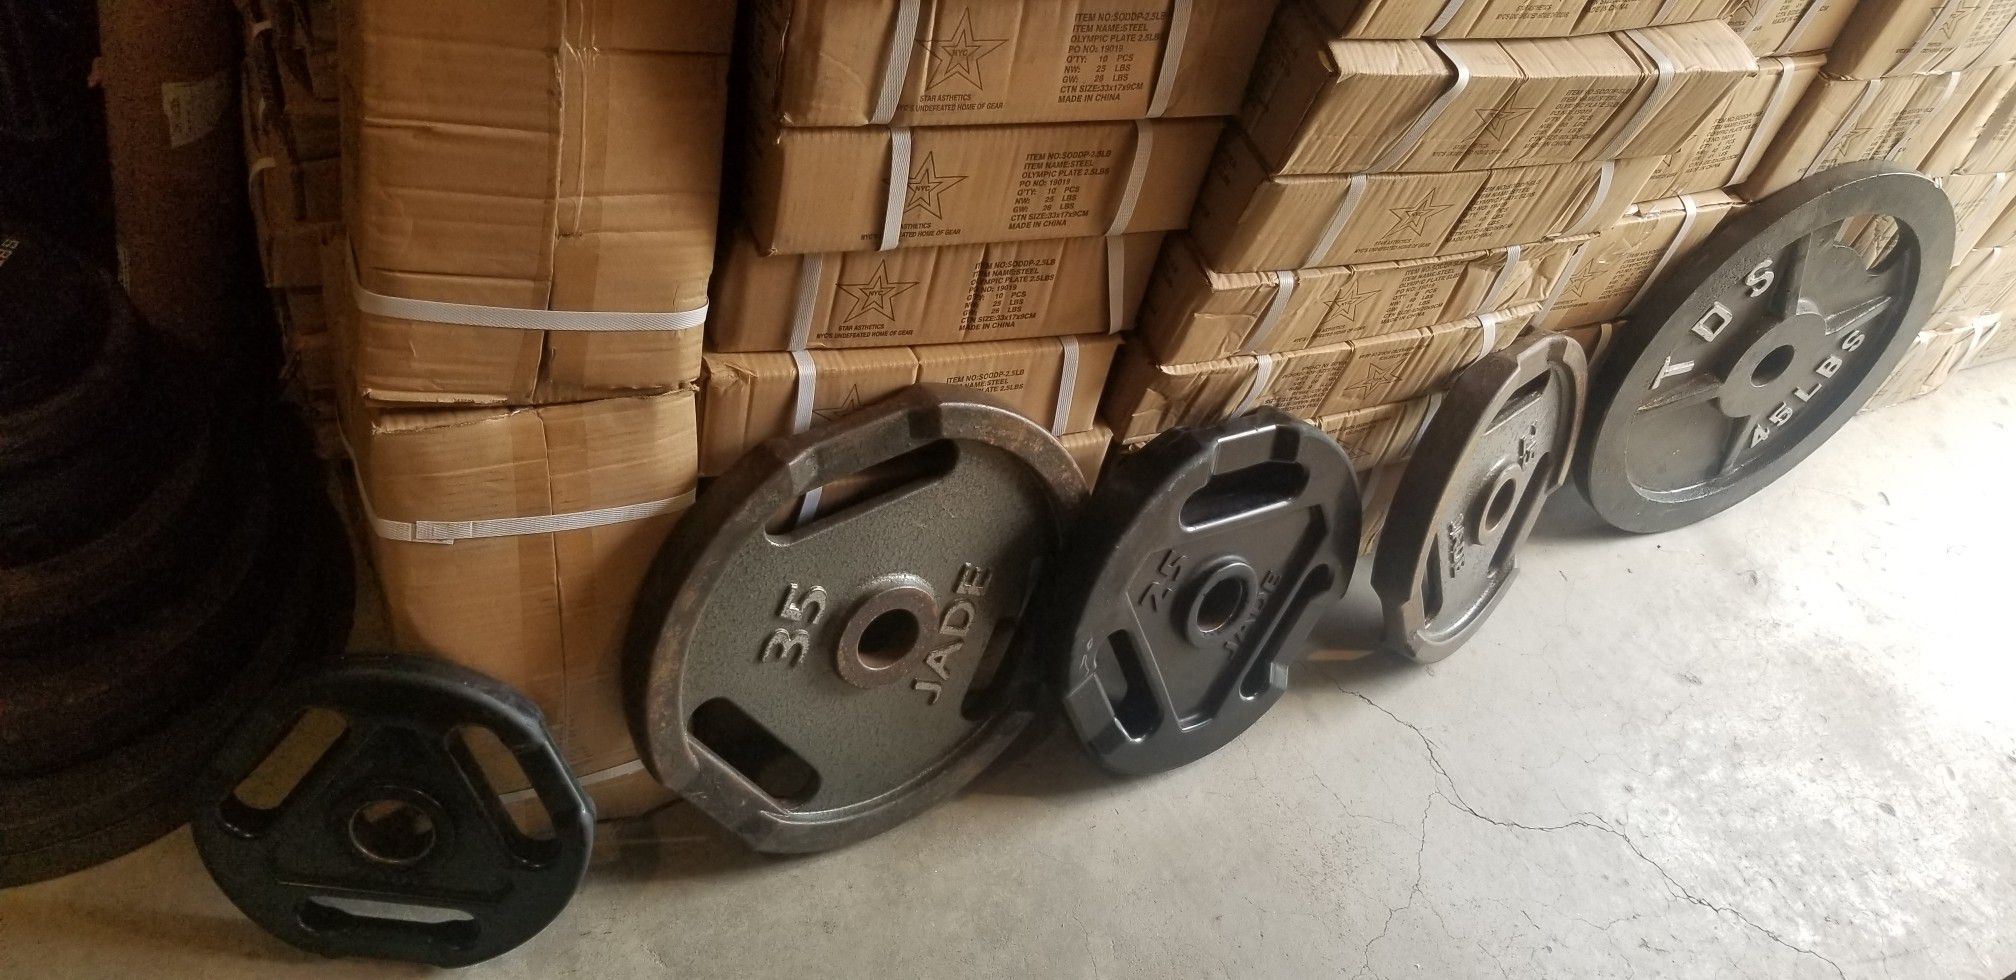 SINGLE OLYMPIC WEIGHTS PLATES NOT PAIRS .40 CENTS PER LB